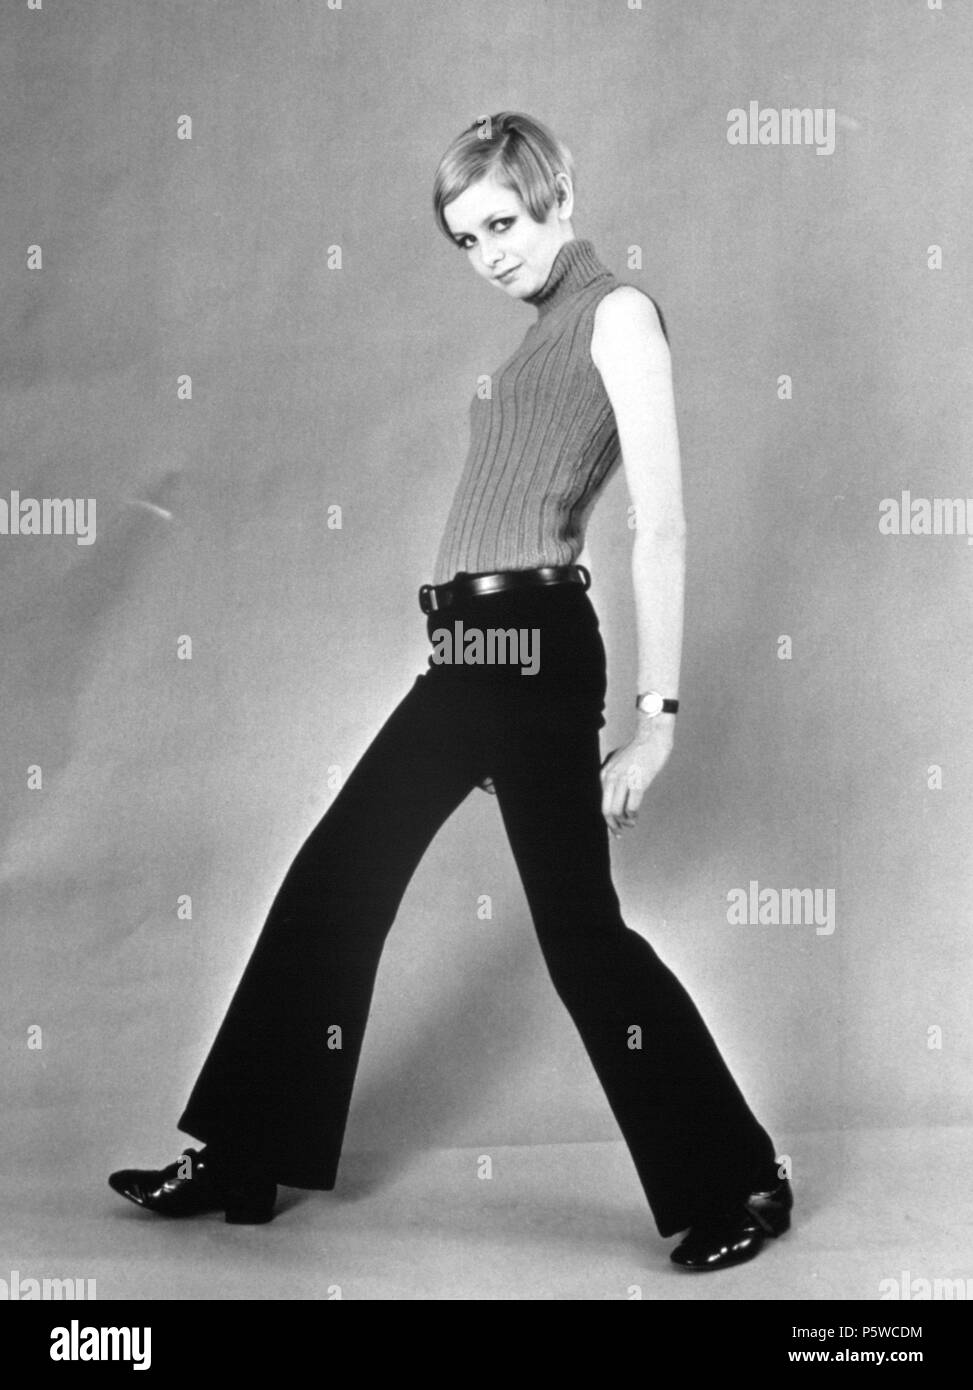 English Supermodel Twiggy Attends An Event In Los Angeles 1980s OLD PHOTO 2 